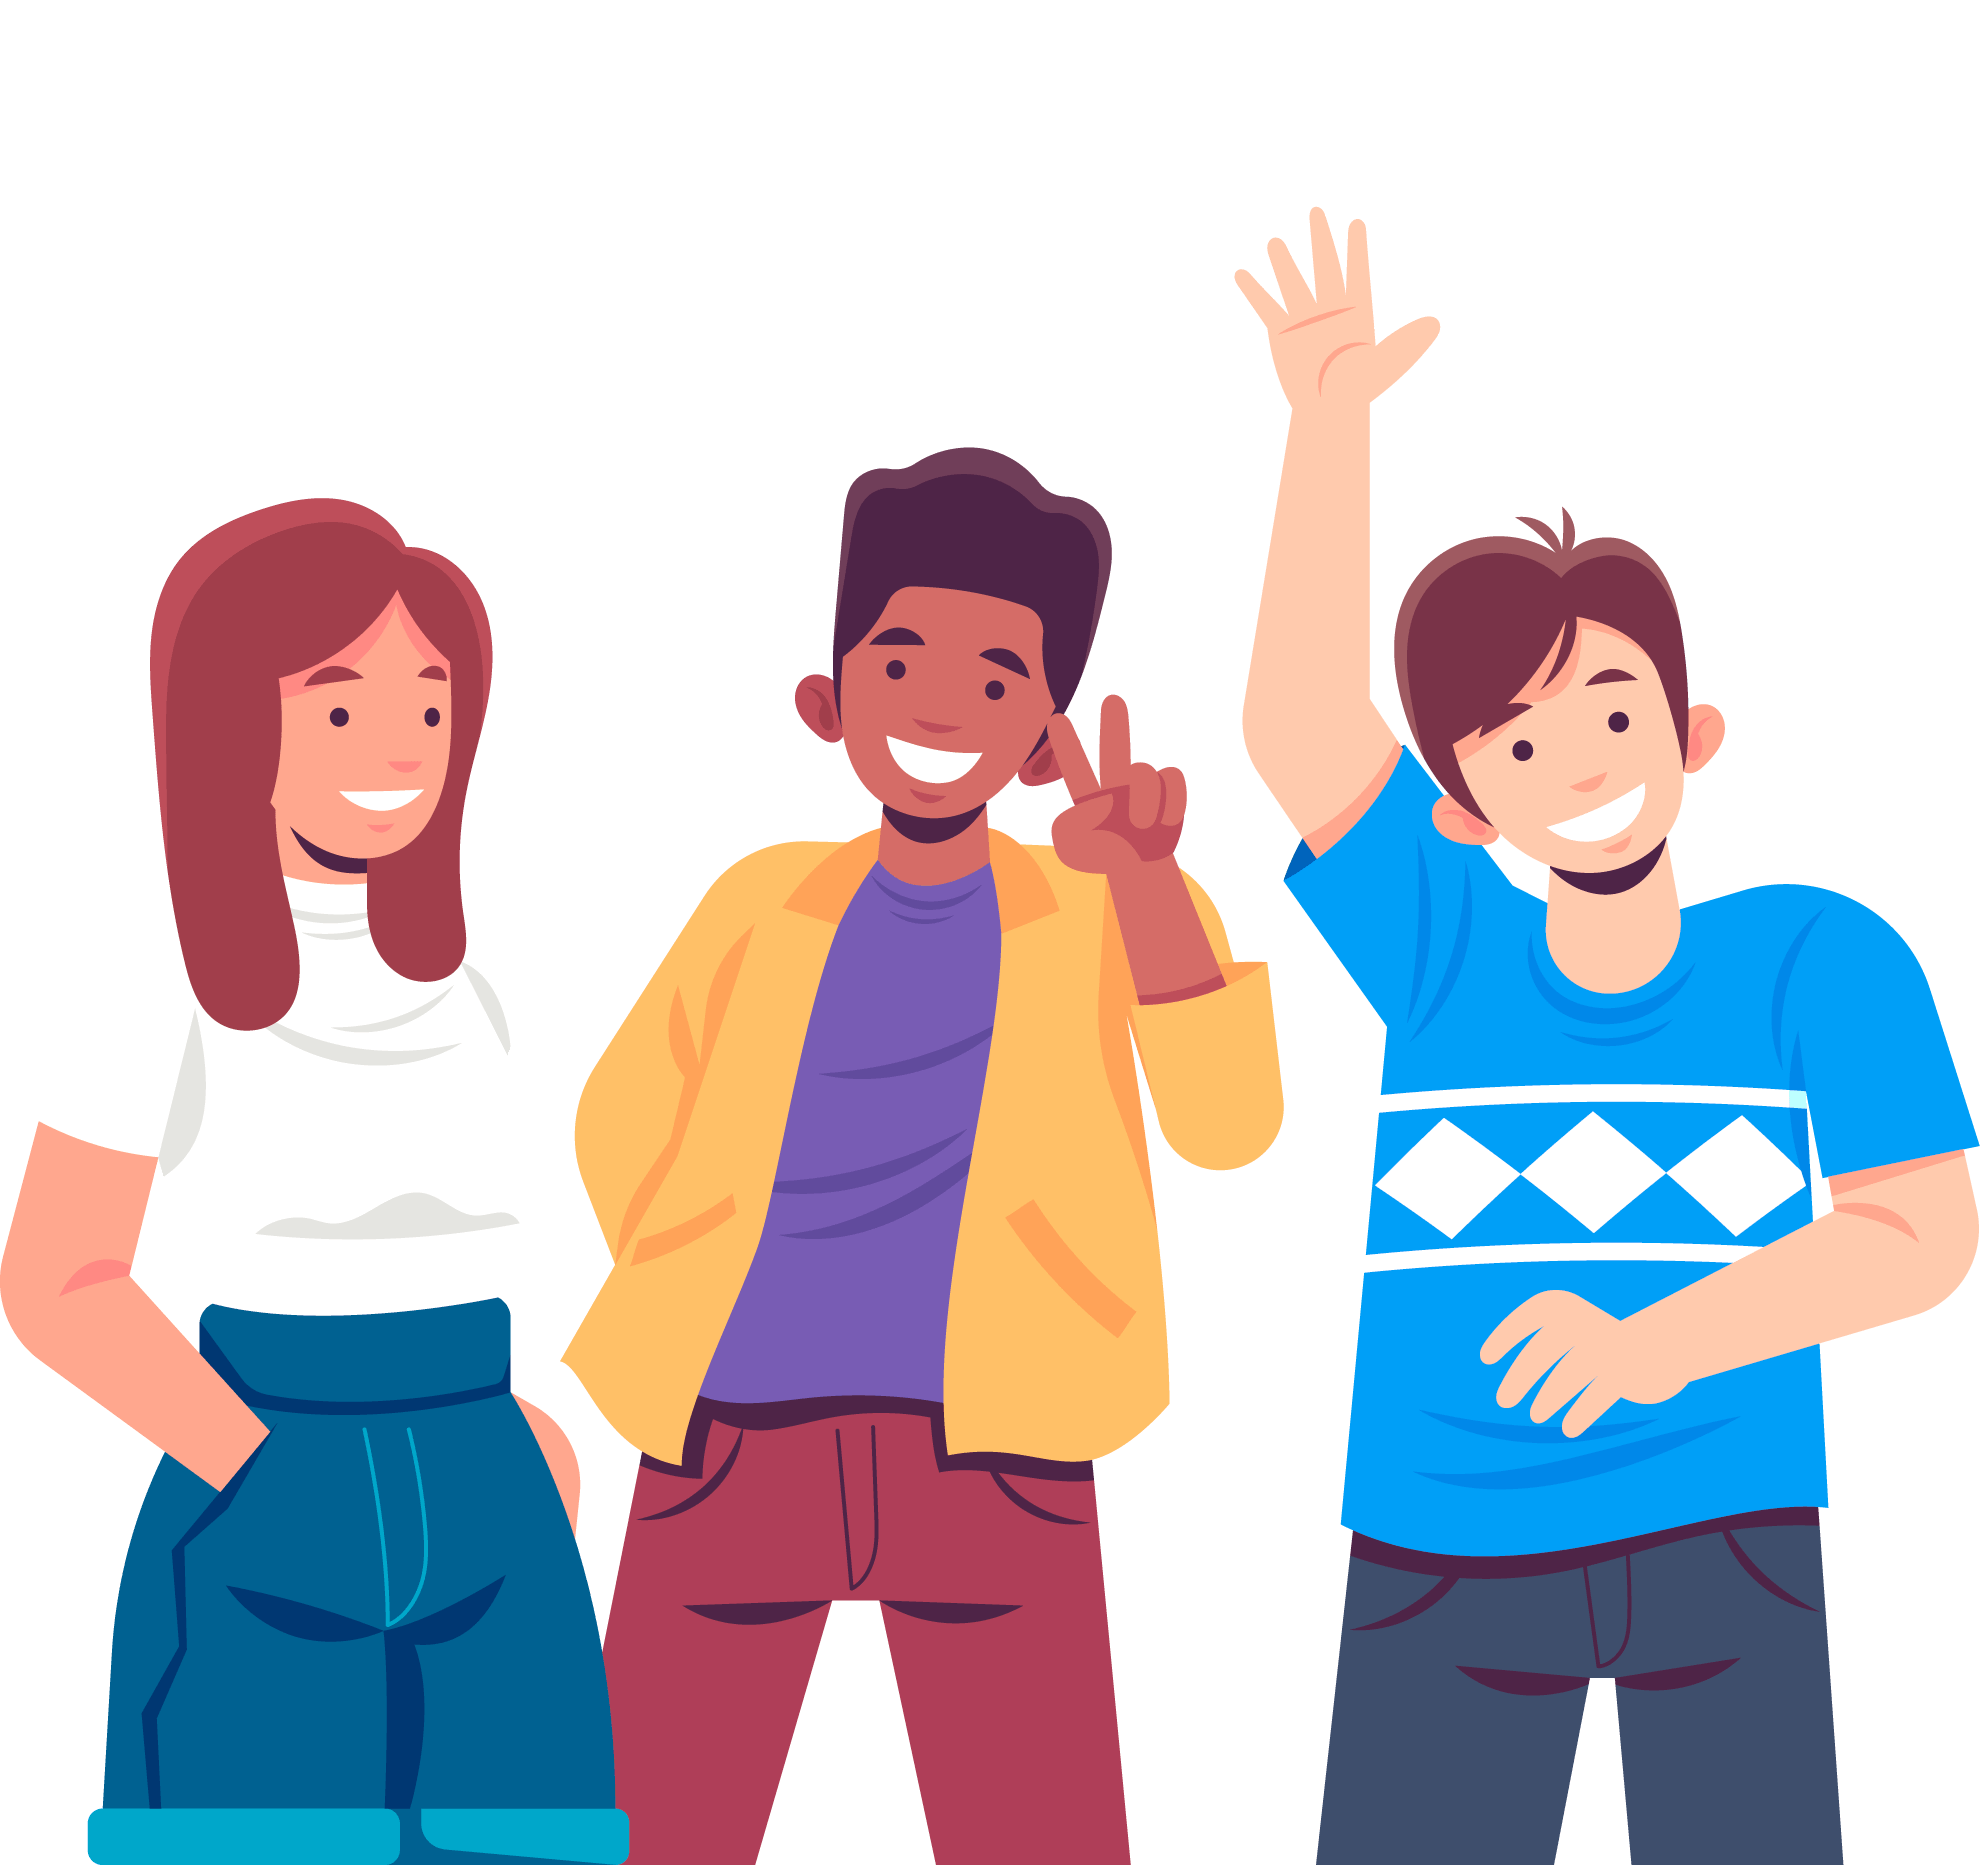 Next World Youth Day Illustration International Happy Youth Day Png 2021